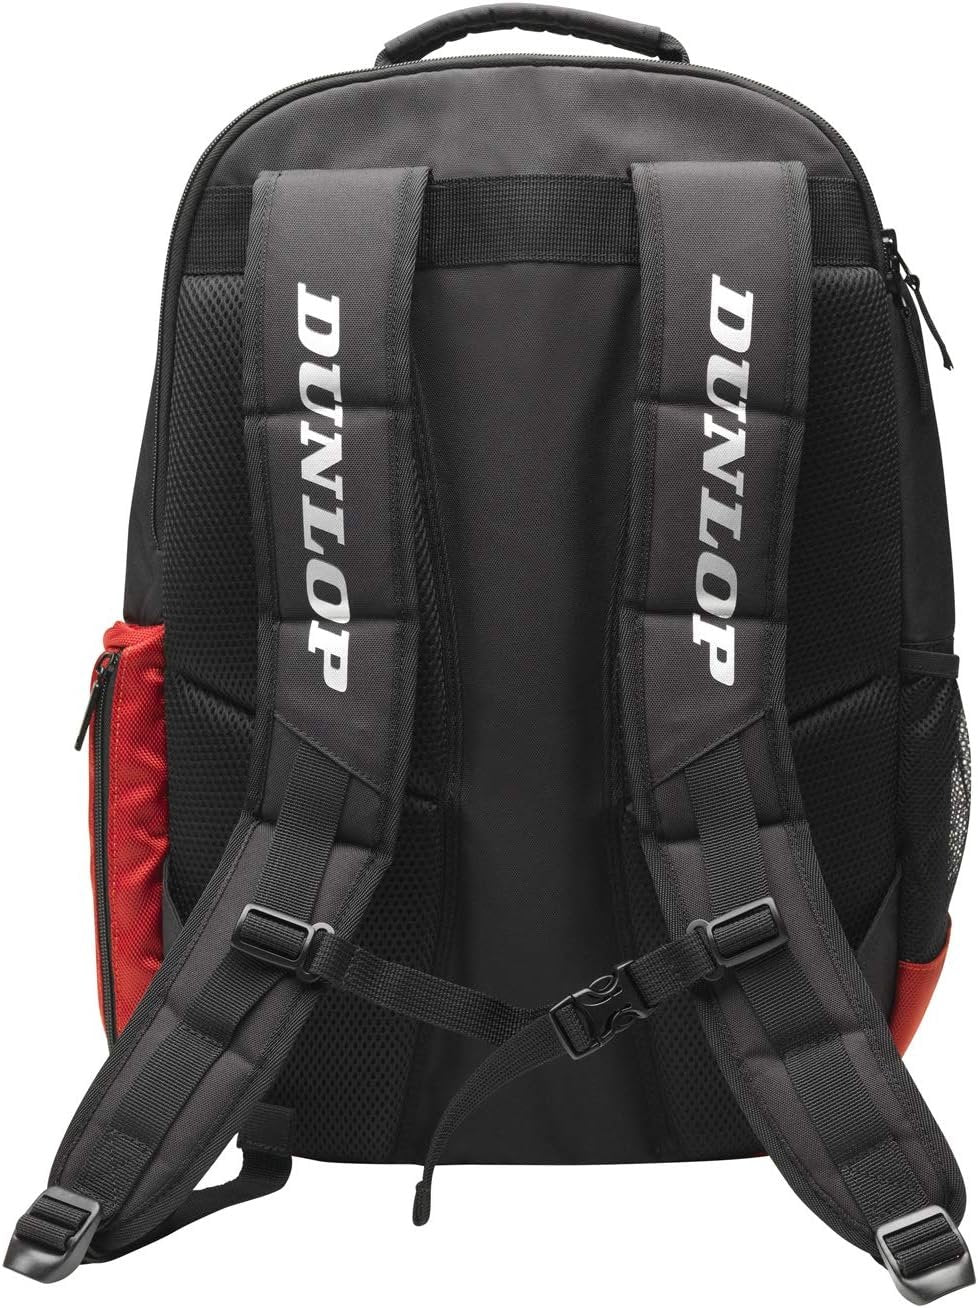 Dunlop Sports 2021 CX Performance Backpack, Black/Red